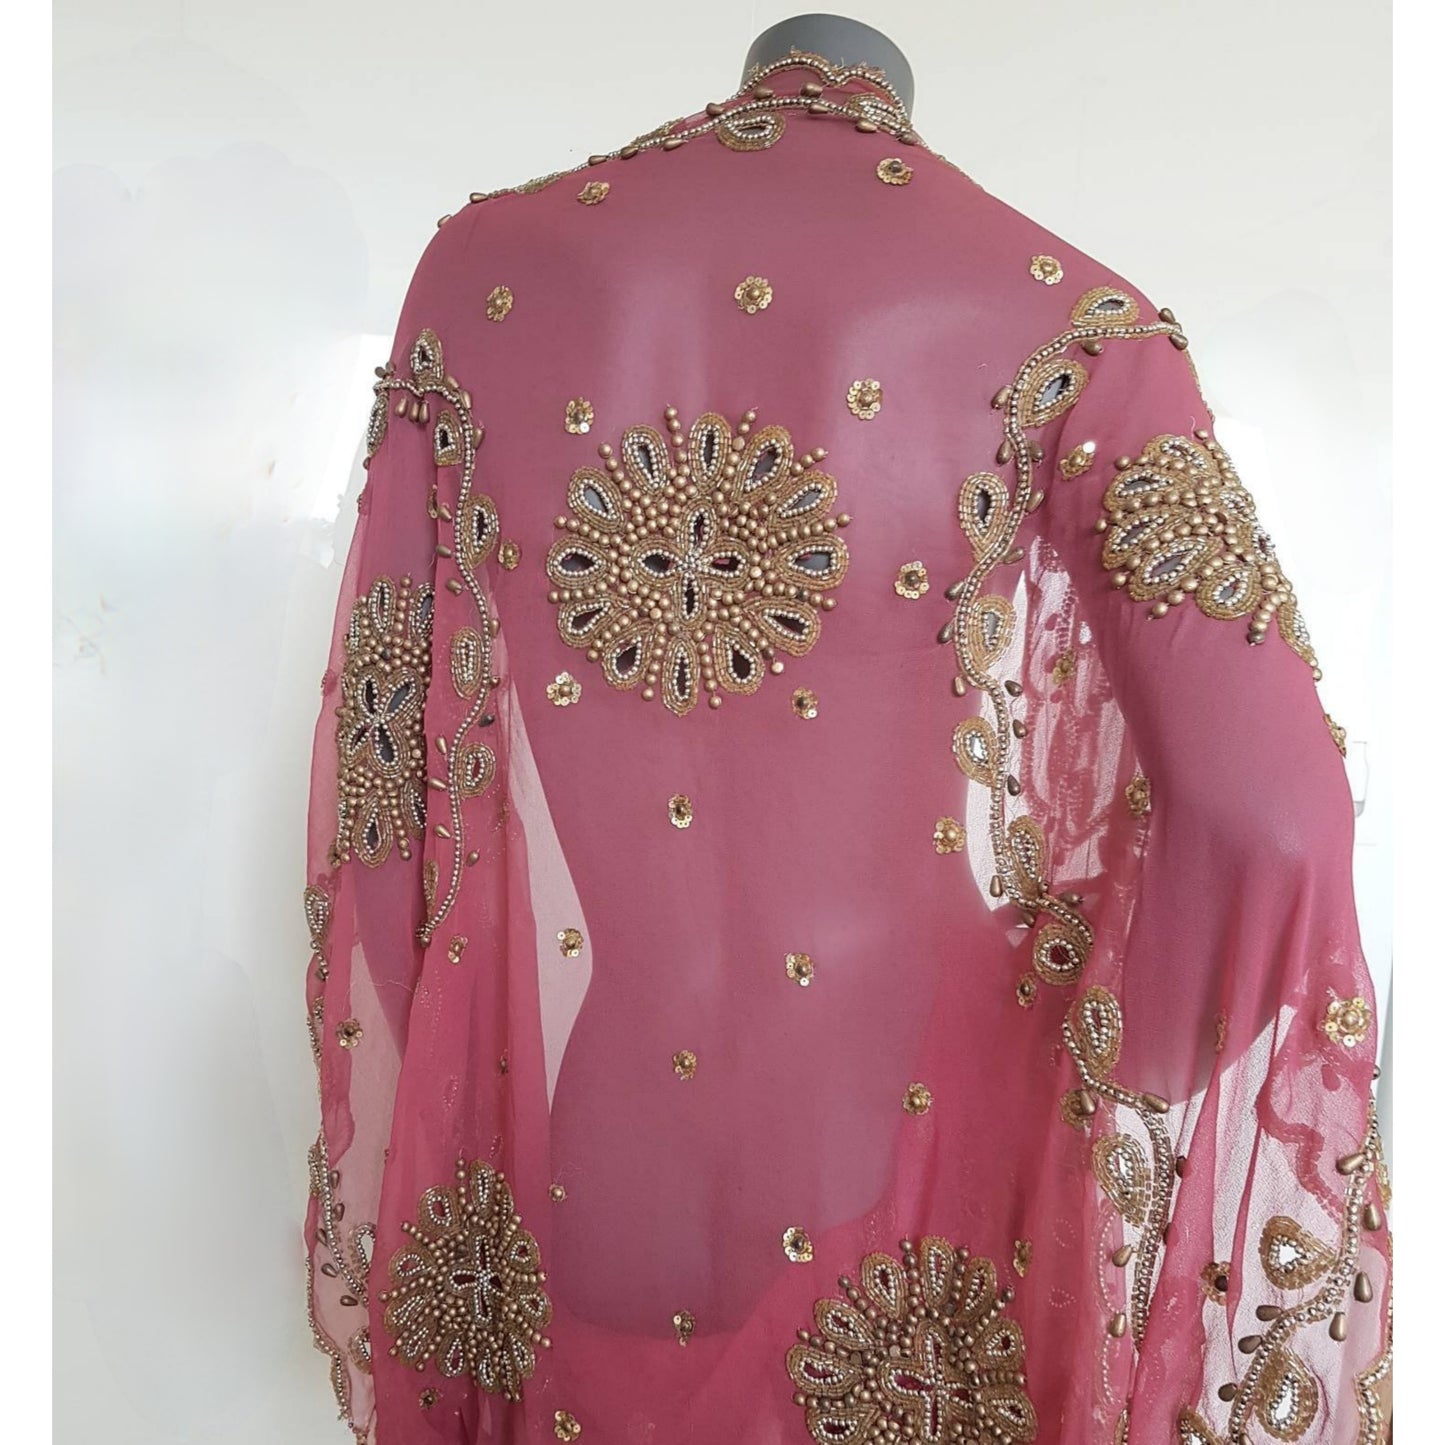 Draped warm pink kimono with beautiful hand embrodery with glass beads and cut outs (M)